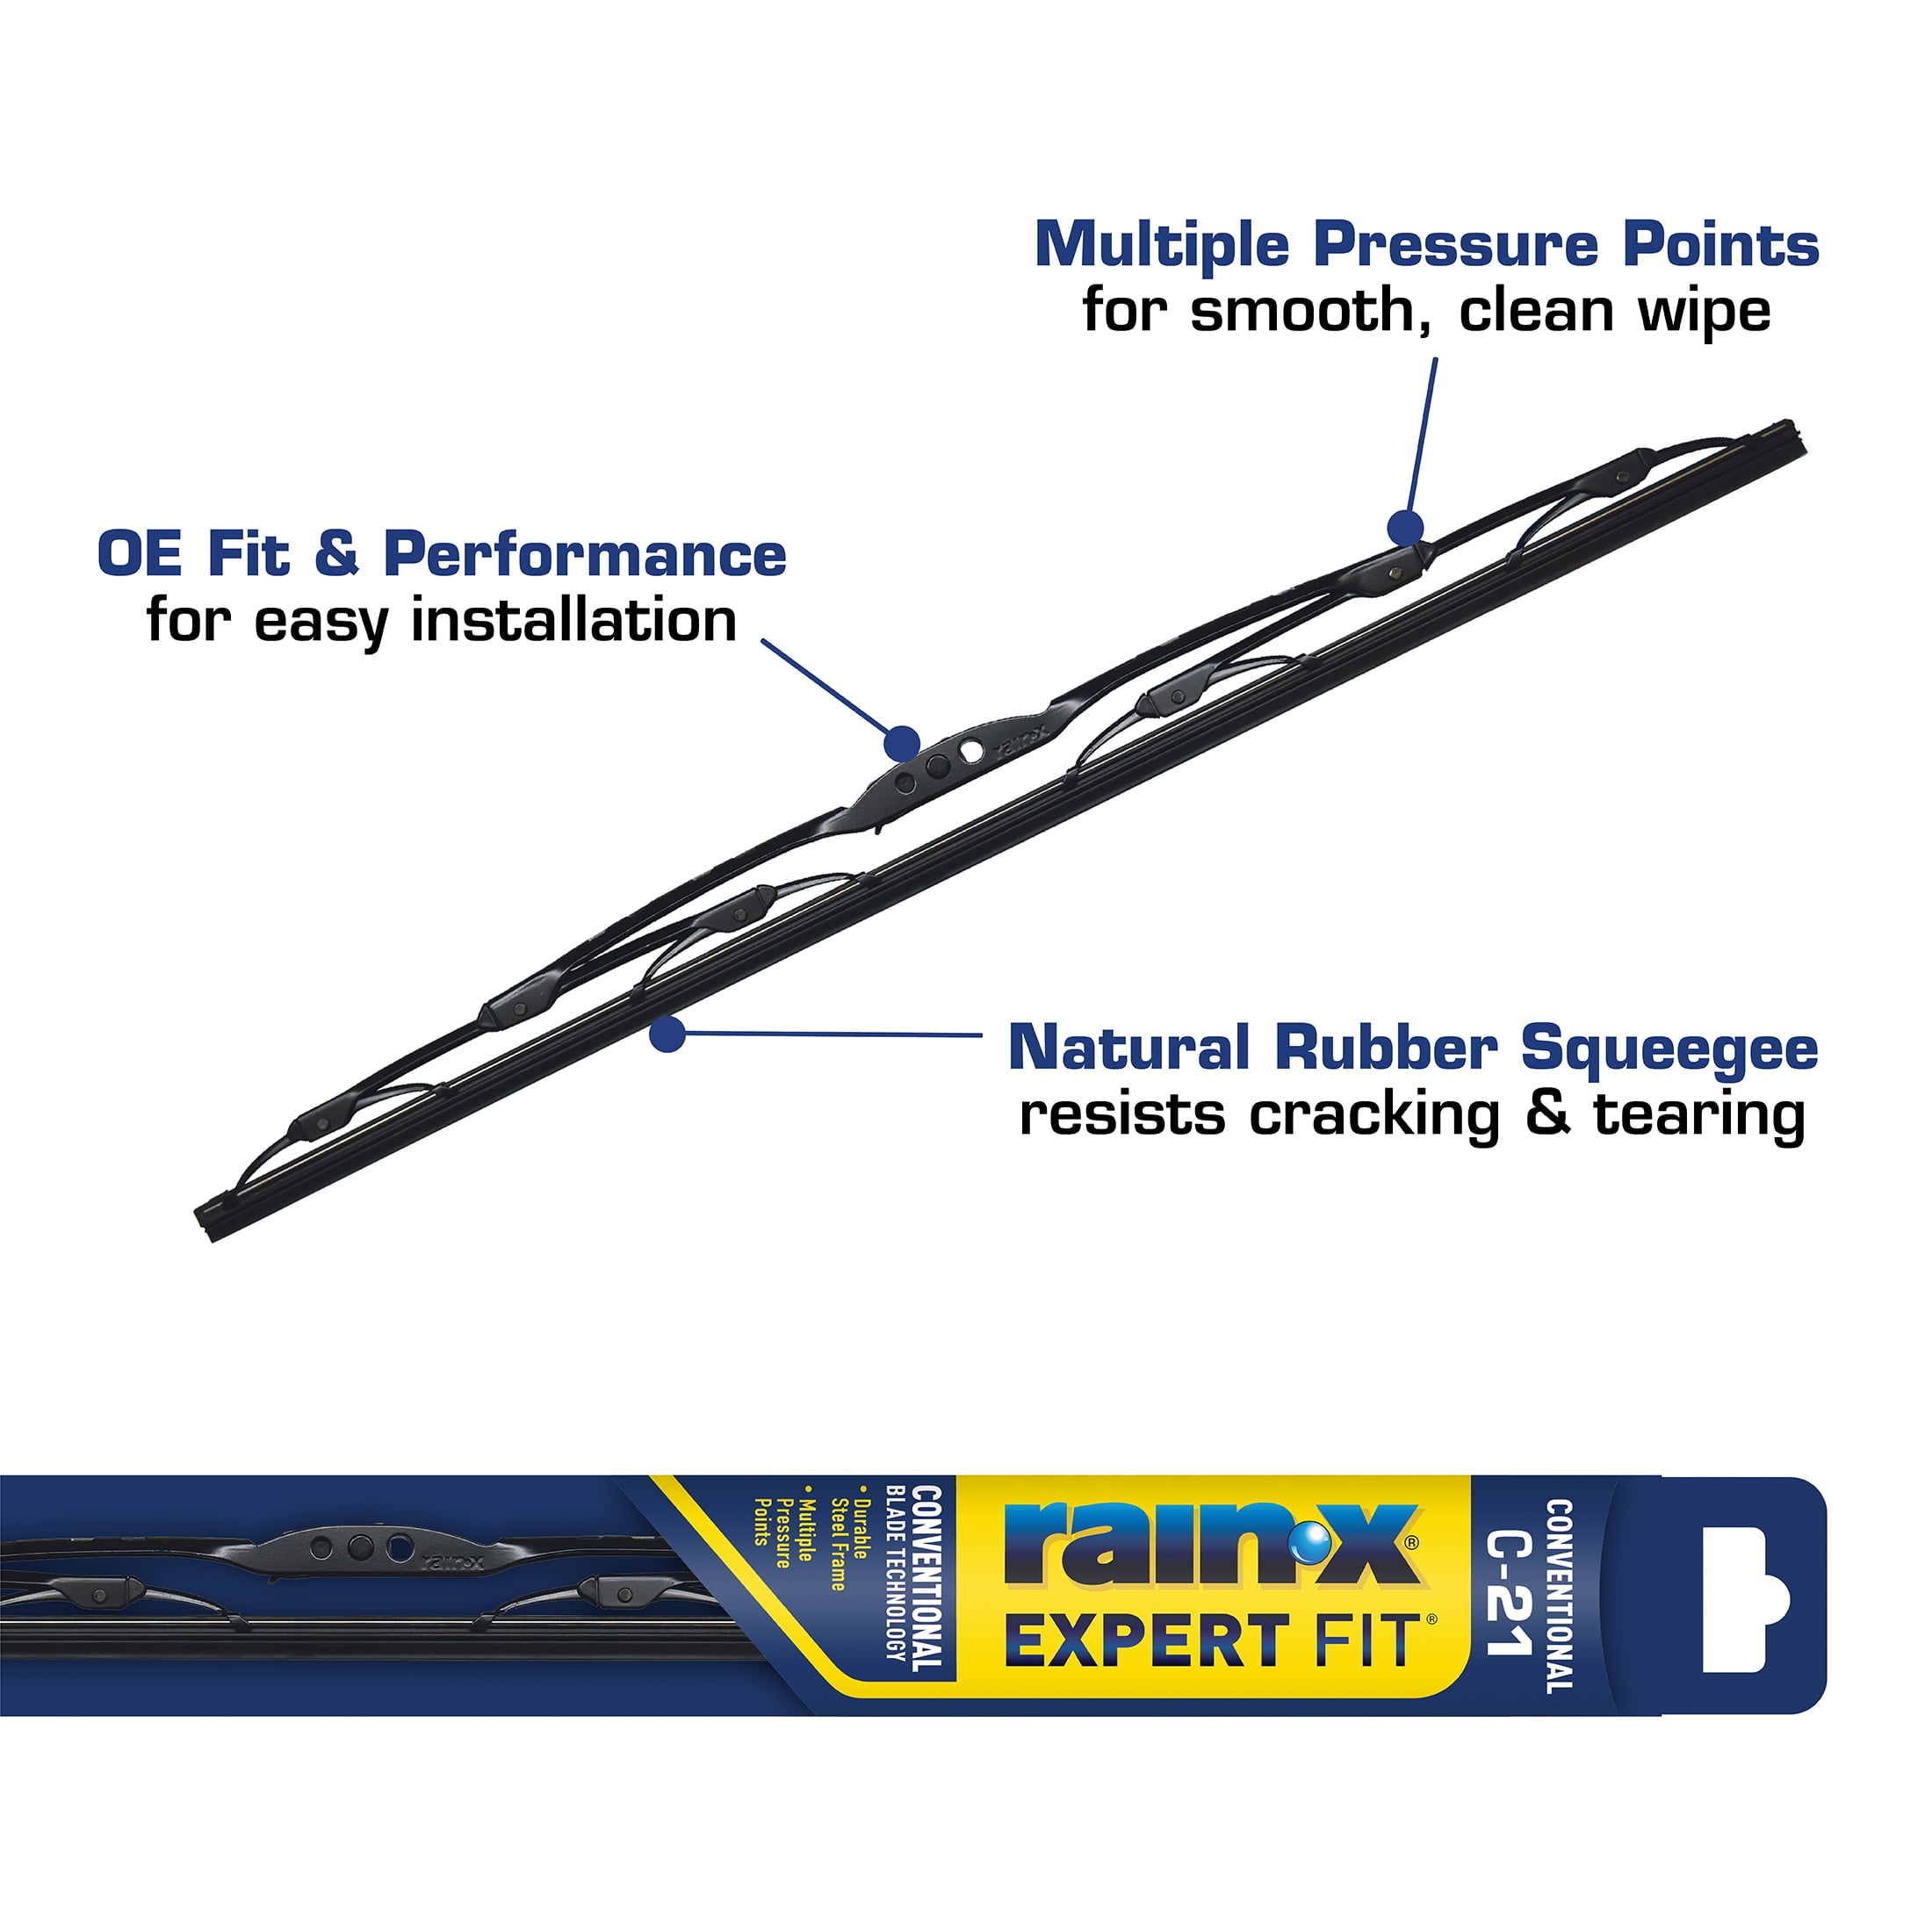 Rain-X Expert Fit Conventional Windshield Wiper Blade C21-4 - 860021, Size: 21 inch